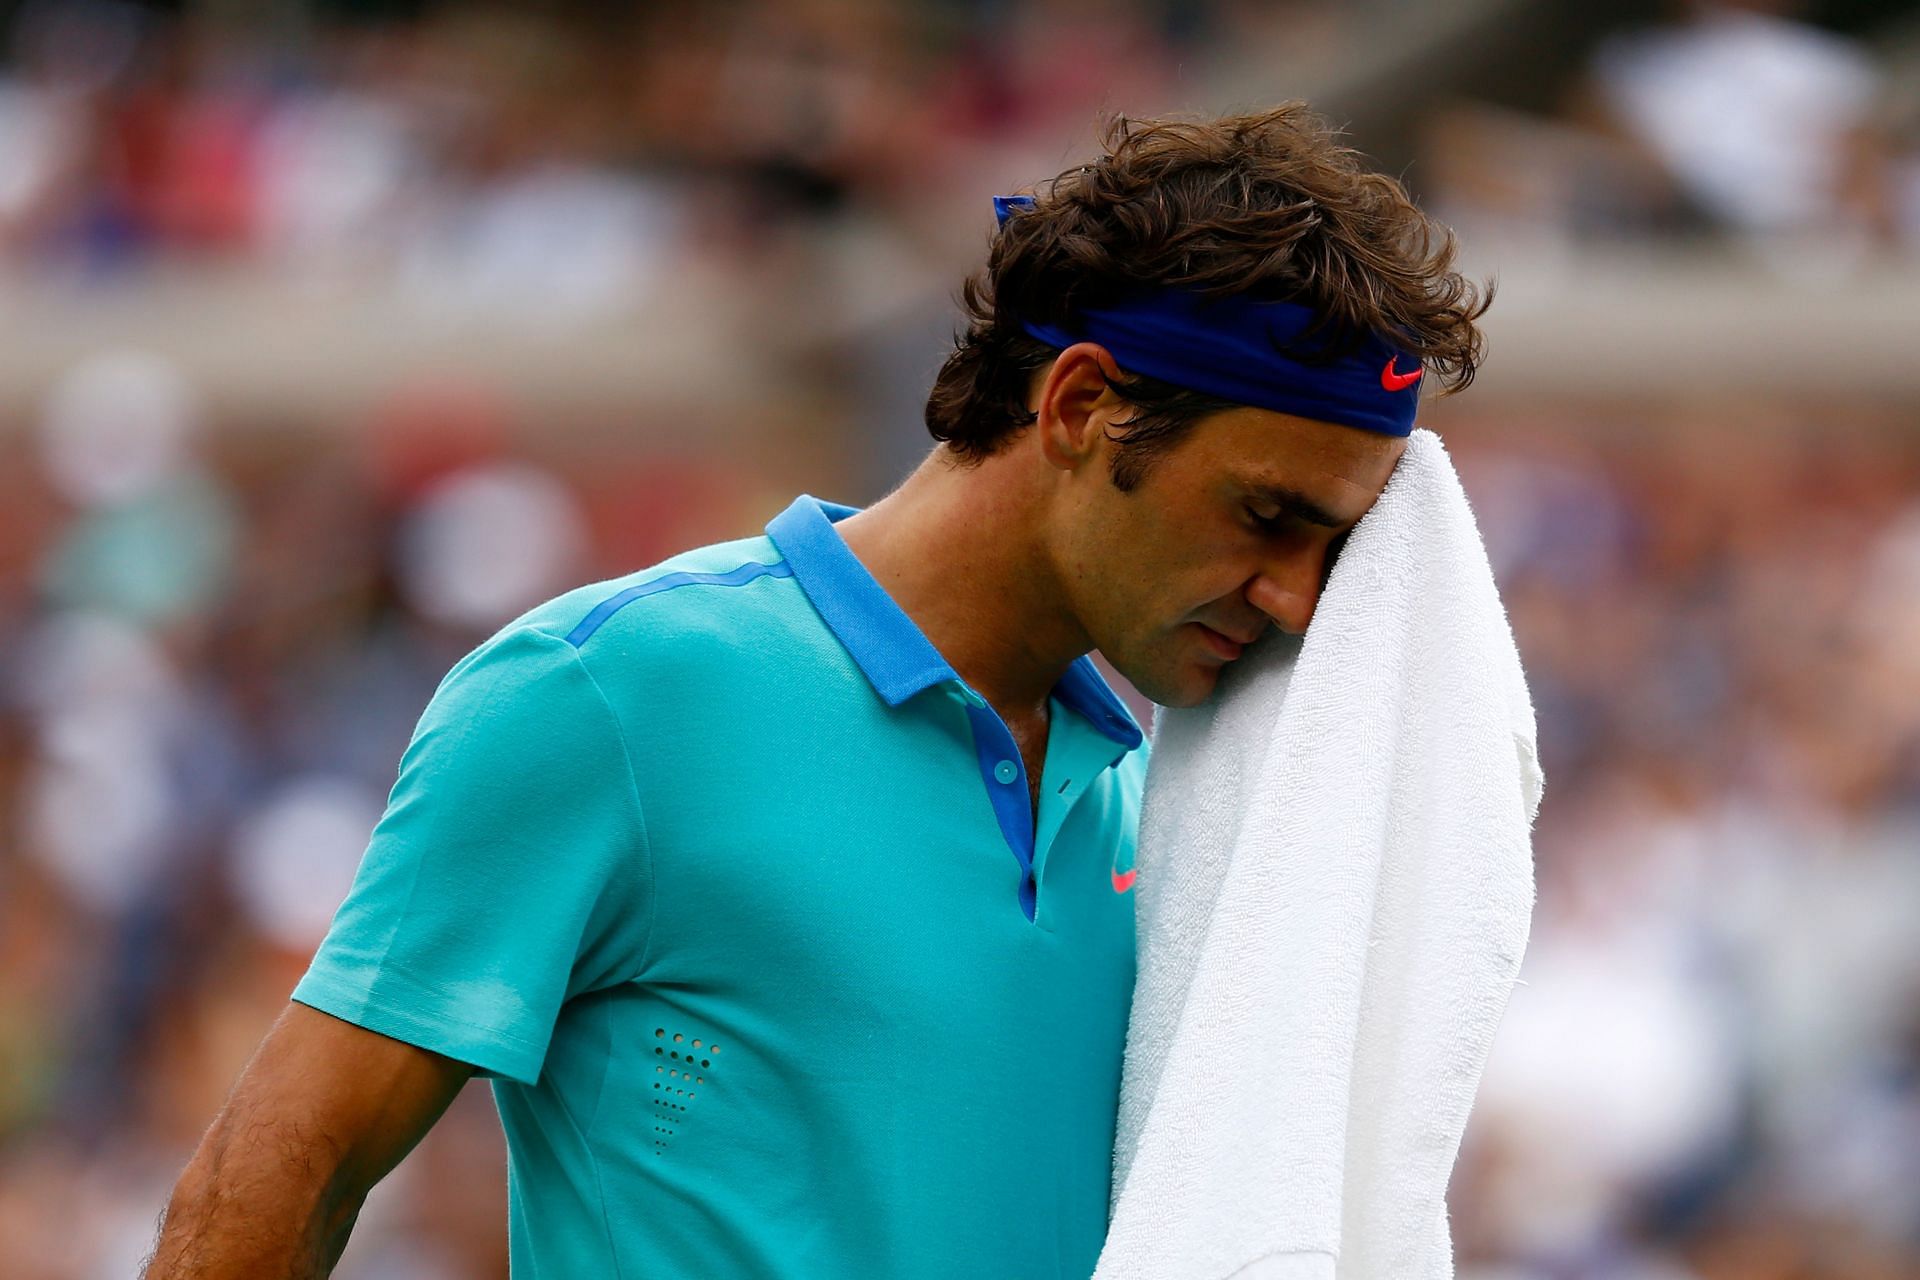 Roger Federer fell to Marin Cilic in the semifinals of 2014 US Open